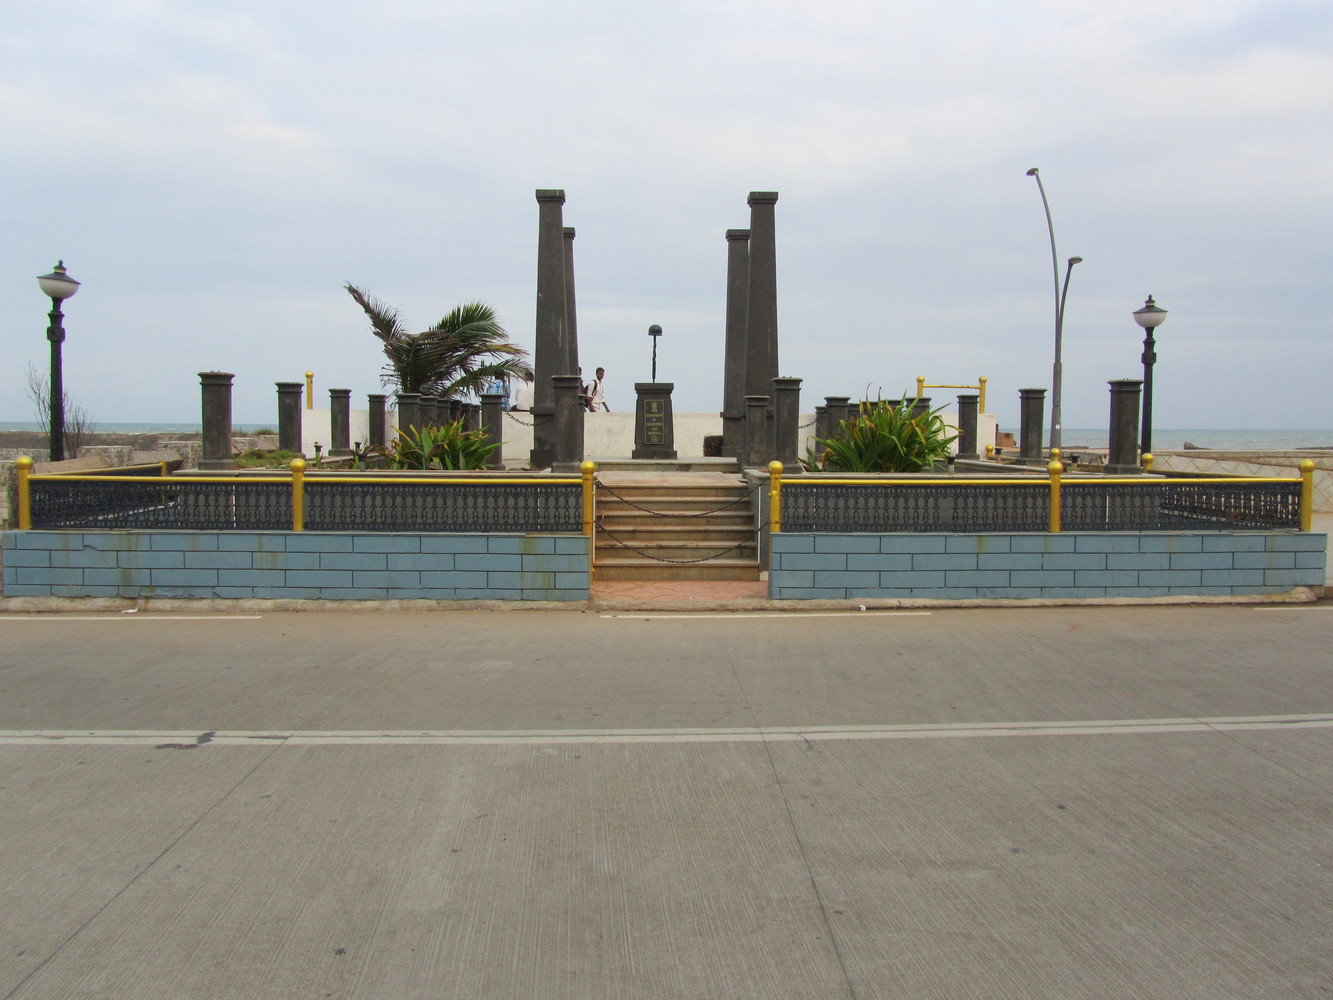 A memorial with four tall gray pillars, many small gray pillars, and a gray centopah at the centre with a rifle capped by a war helmet